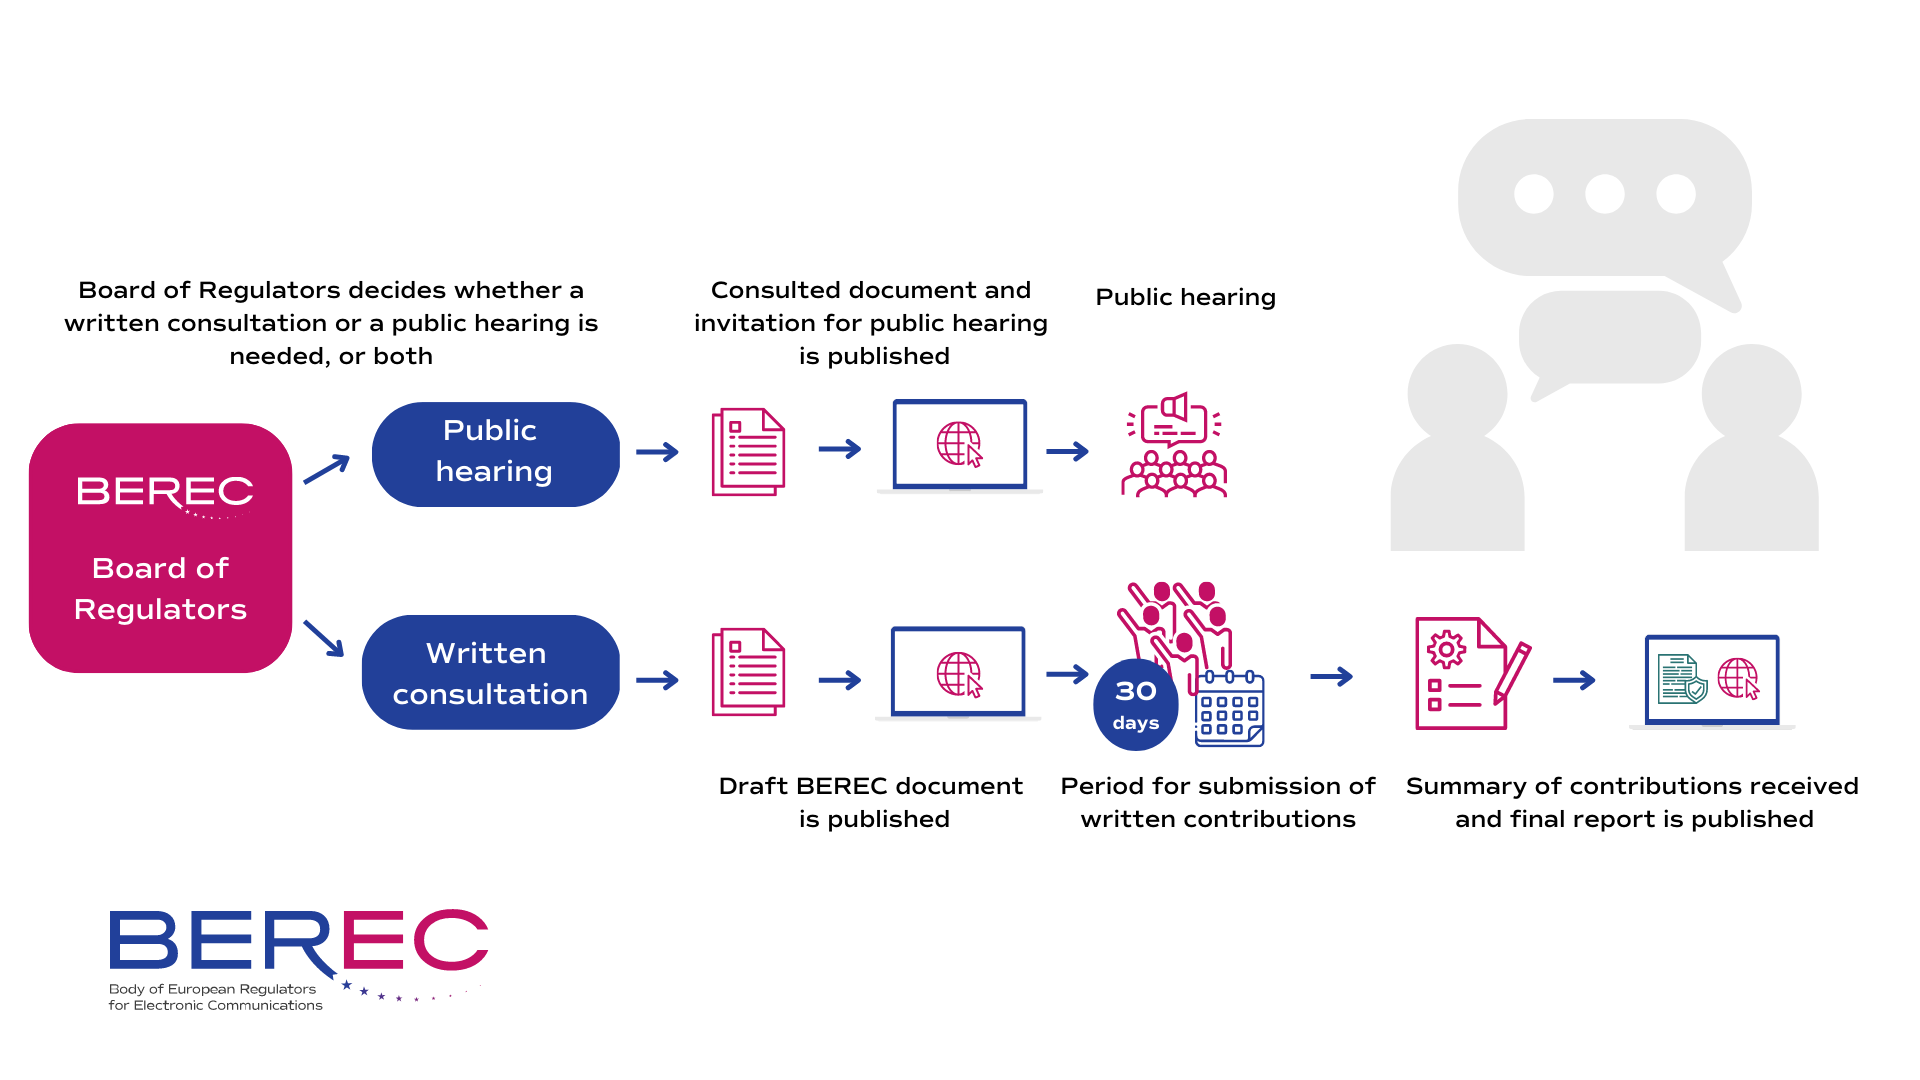 The image shows a flow chart of the public consultation and public hearing process, described in text form below the image